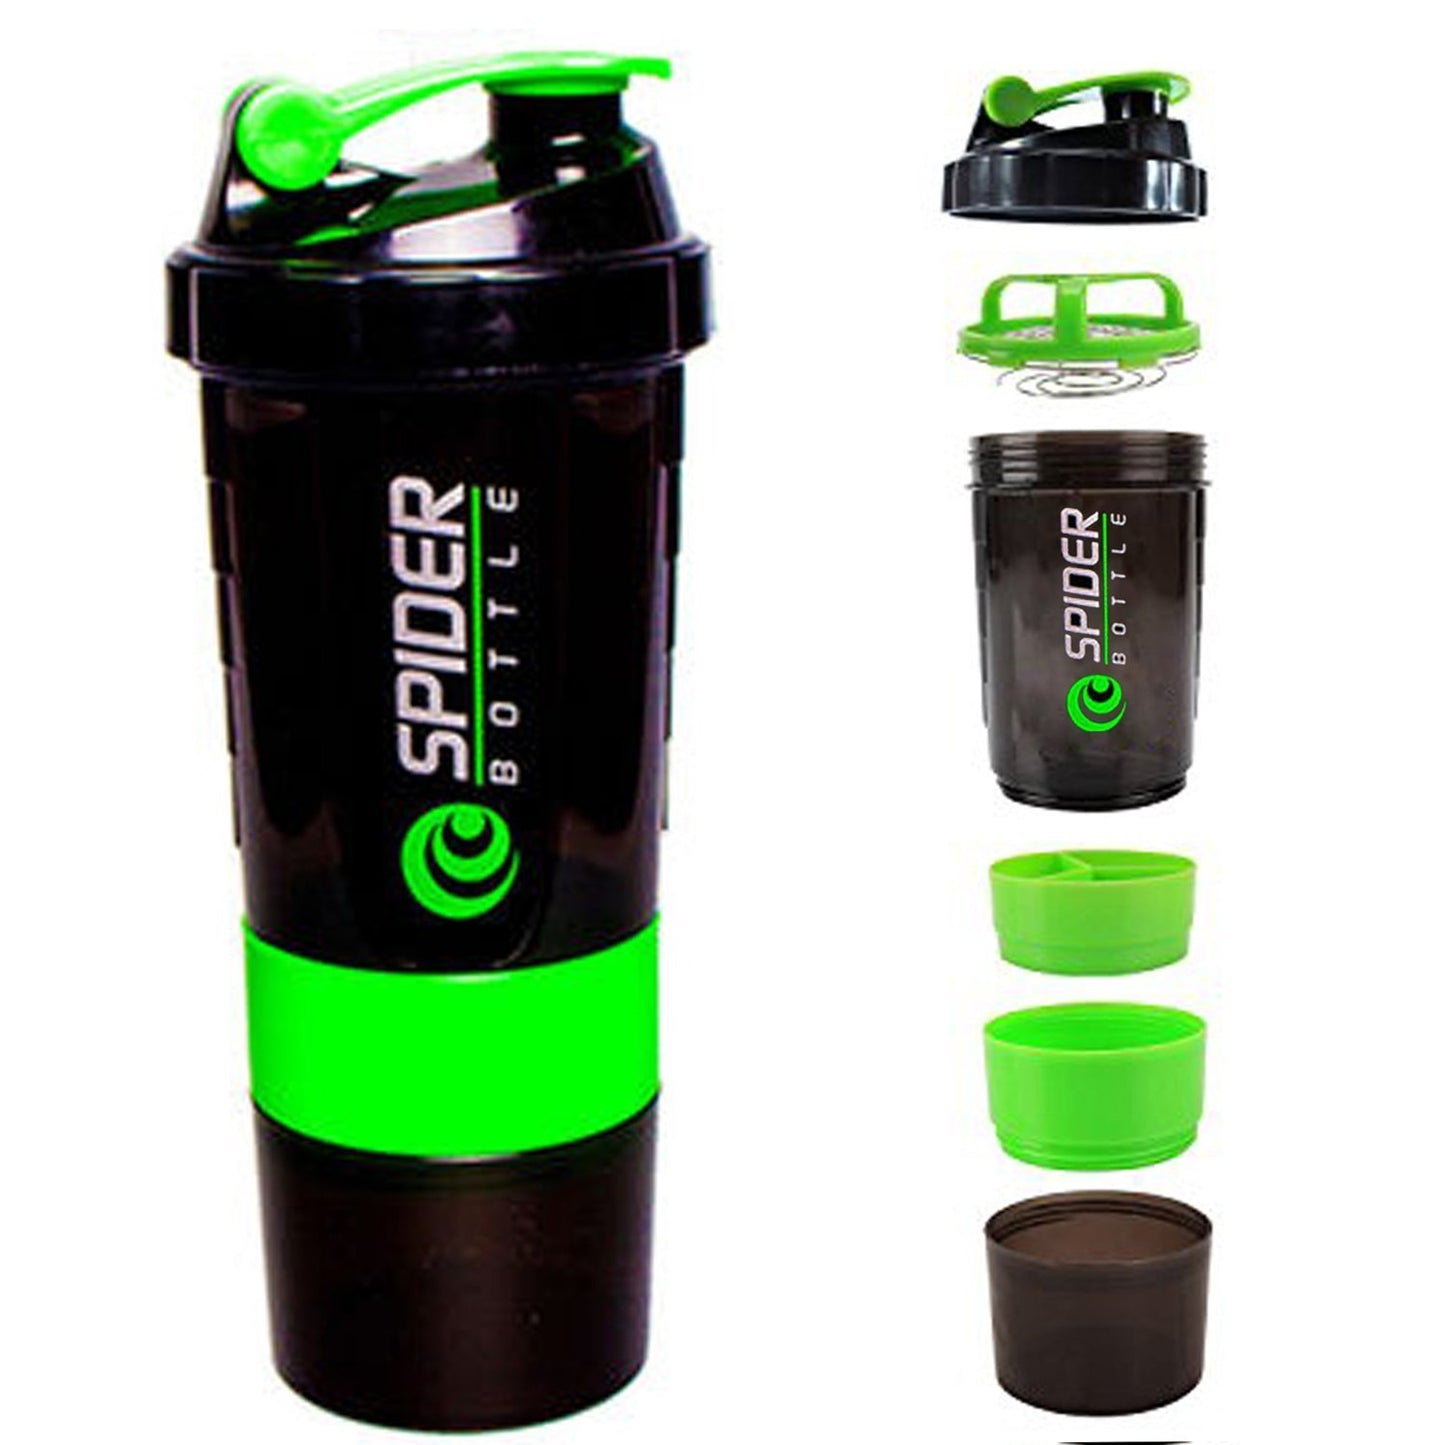 Spider Shaker Bottle for Protein and Gym use (Green-500ml)